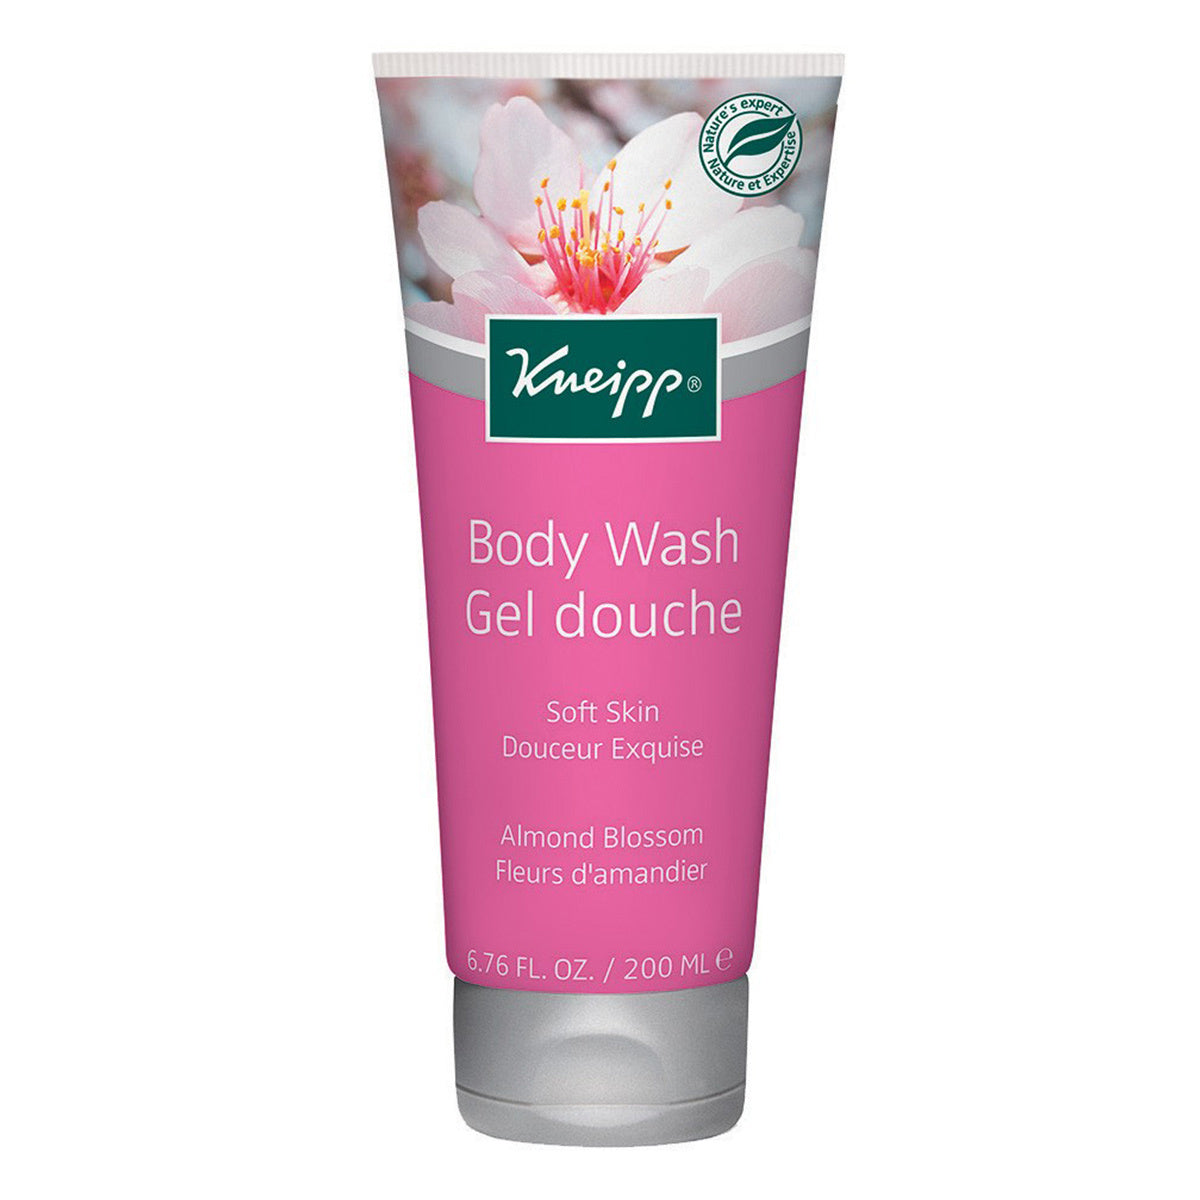 Primary image of Almond Blossom Soft Skin Body Wash